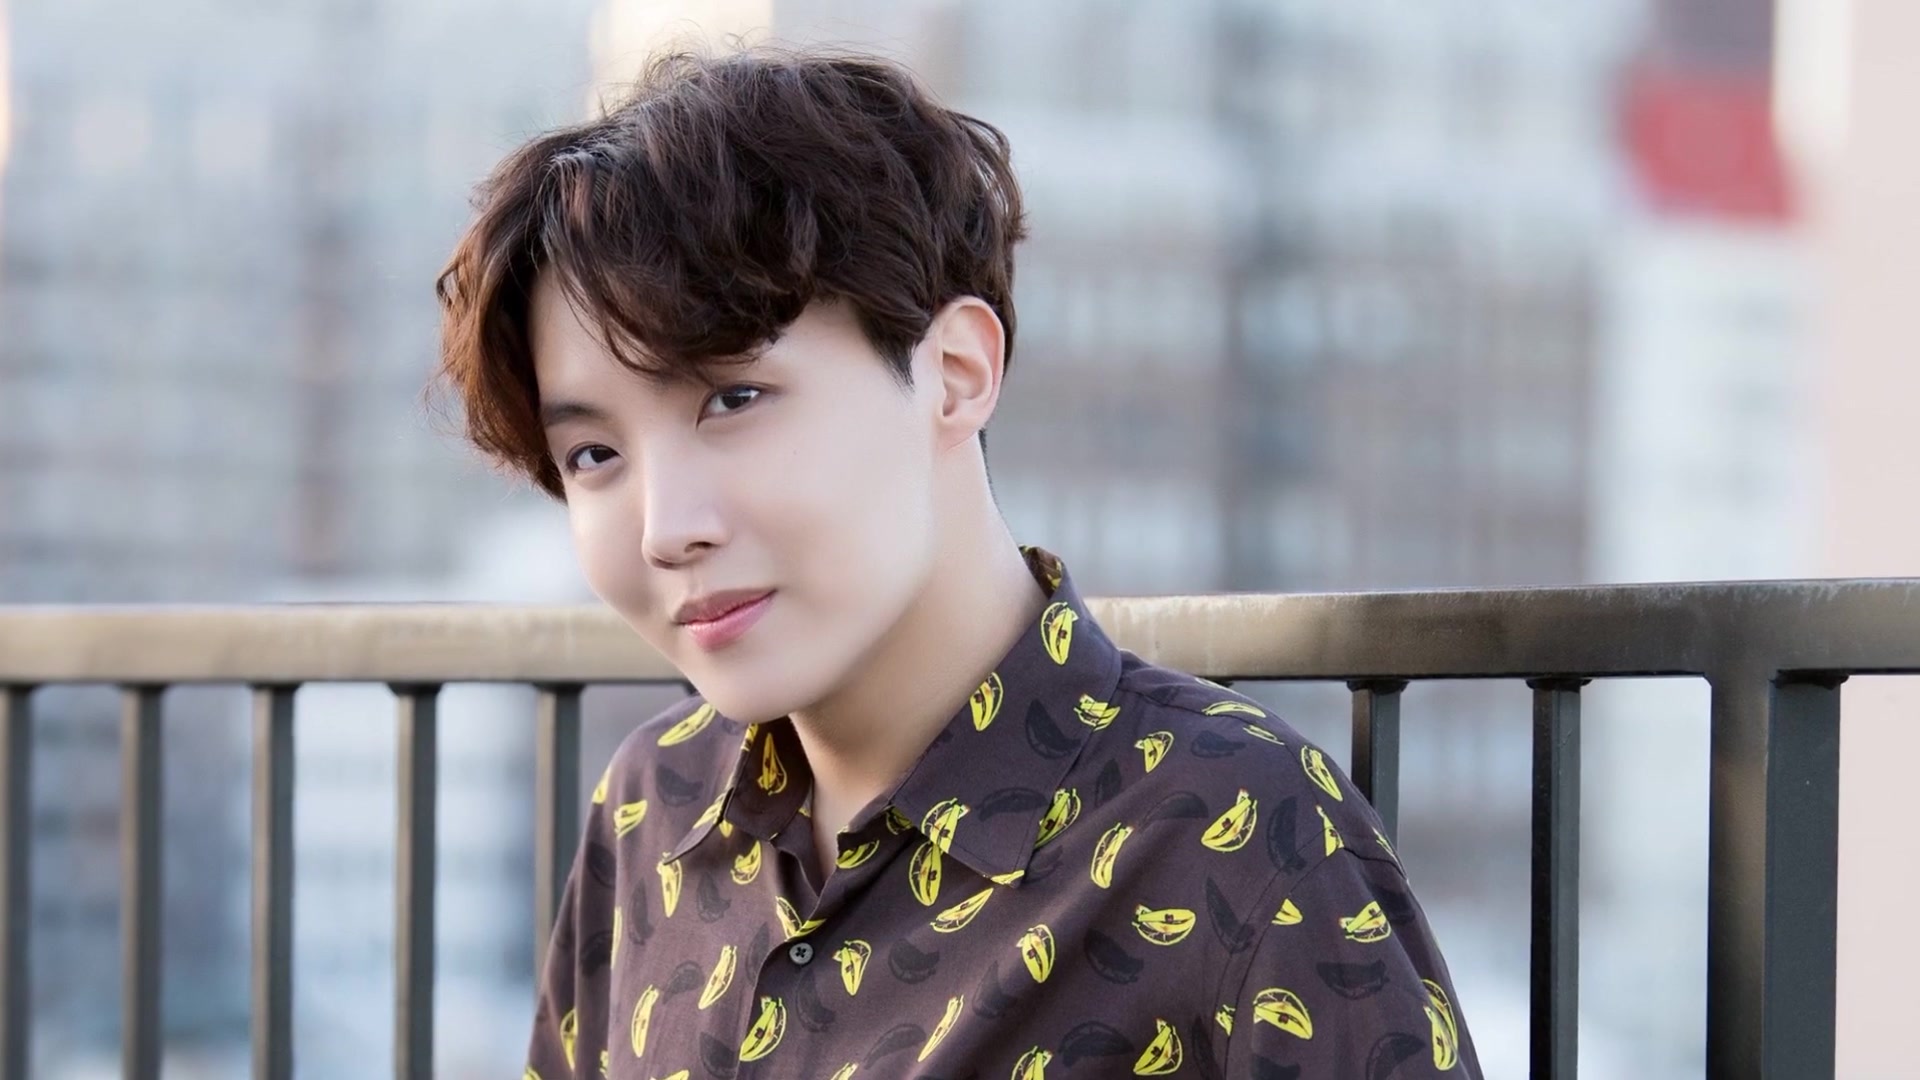 File:J-Hope for BTS 5th anniversary party in LA photoshoot by Dispatch, May  2018 09.jpg - Wikimedia Commons